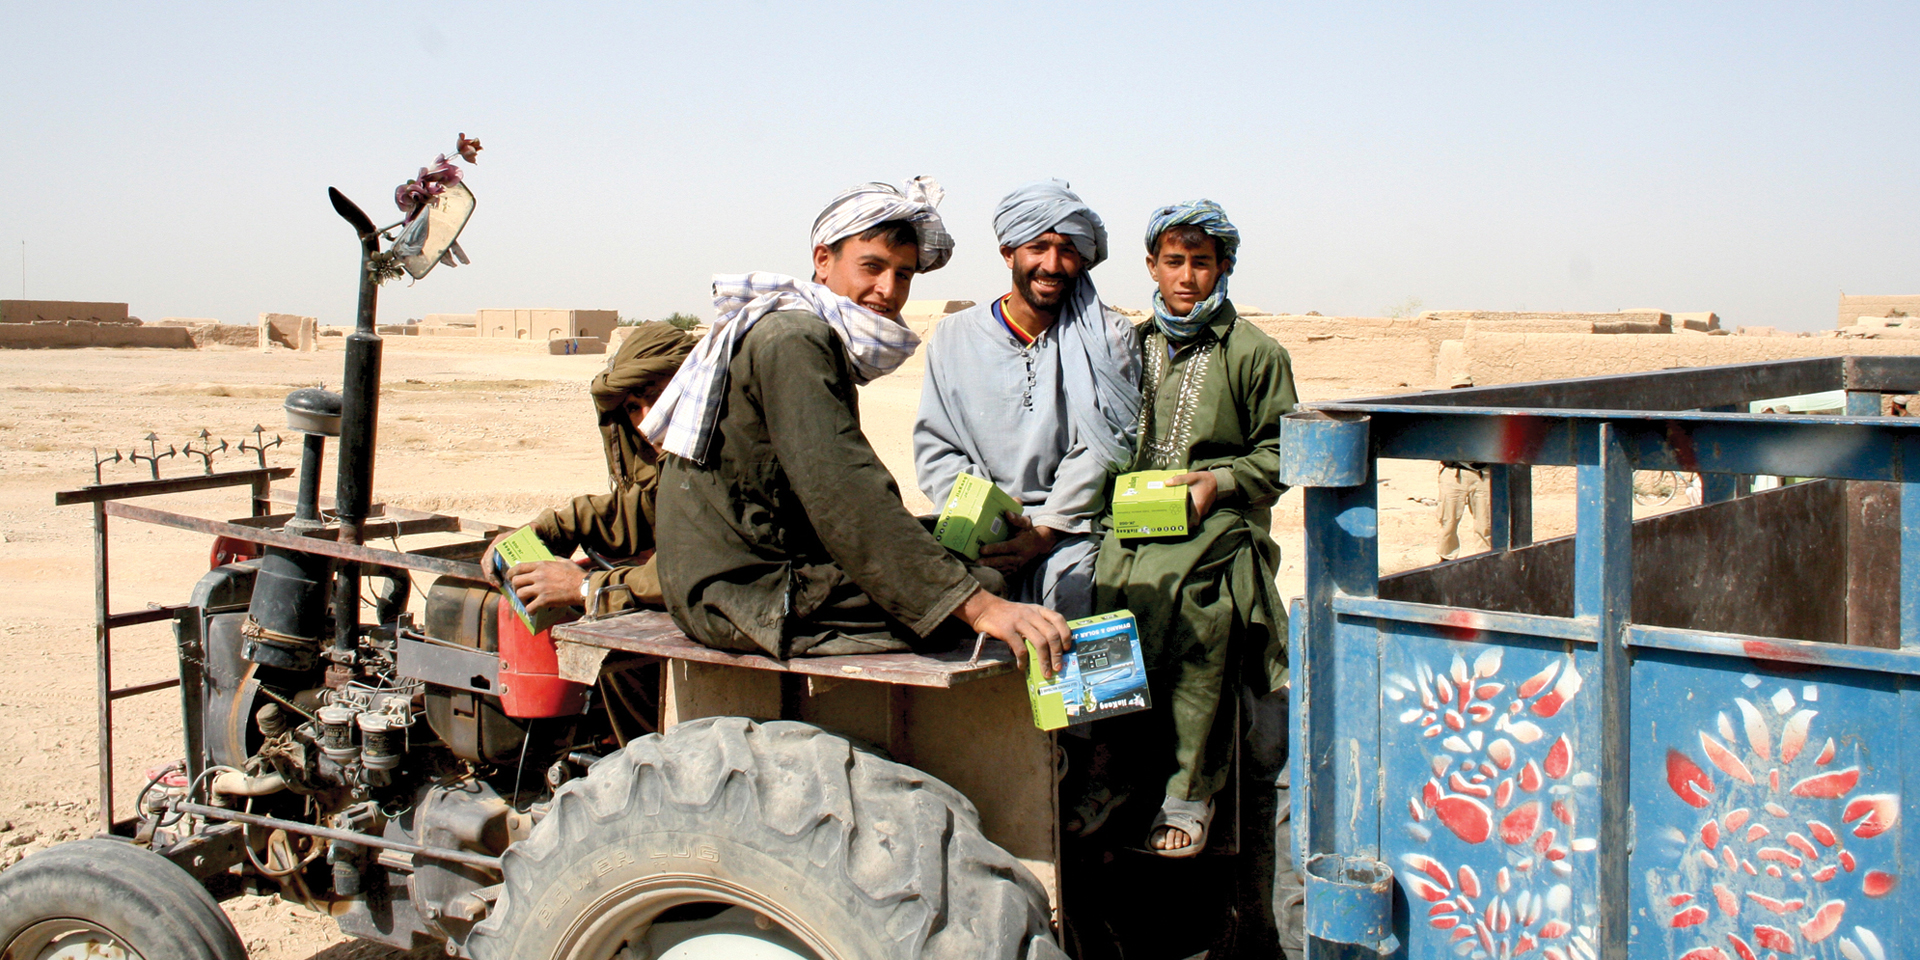 Image of several men smiling and sitting on a tractor with boxes in their hands.